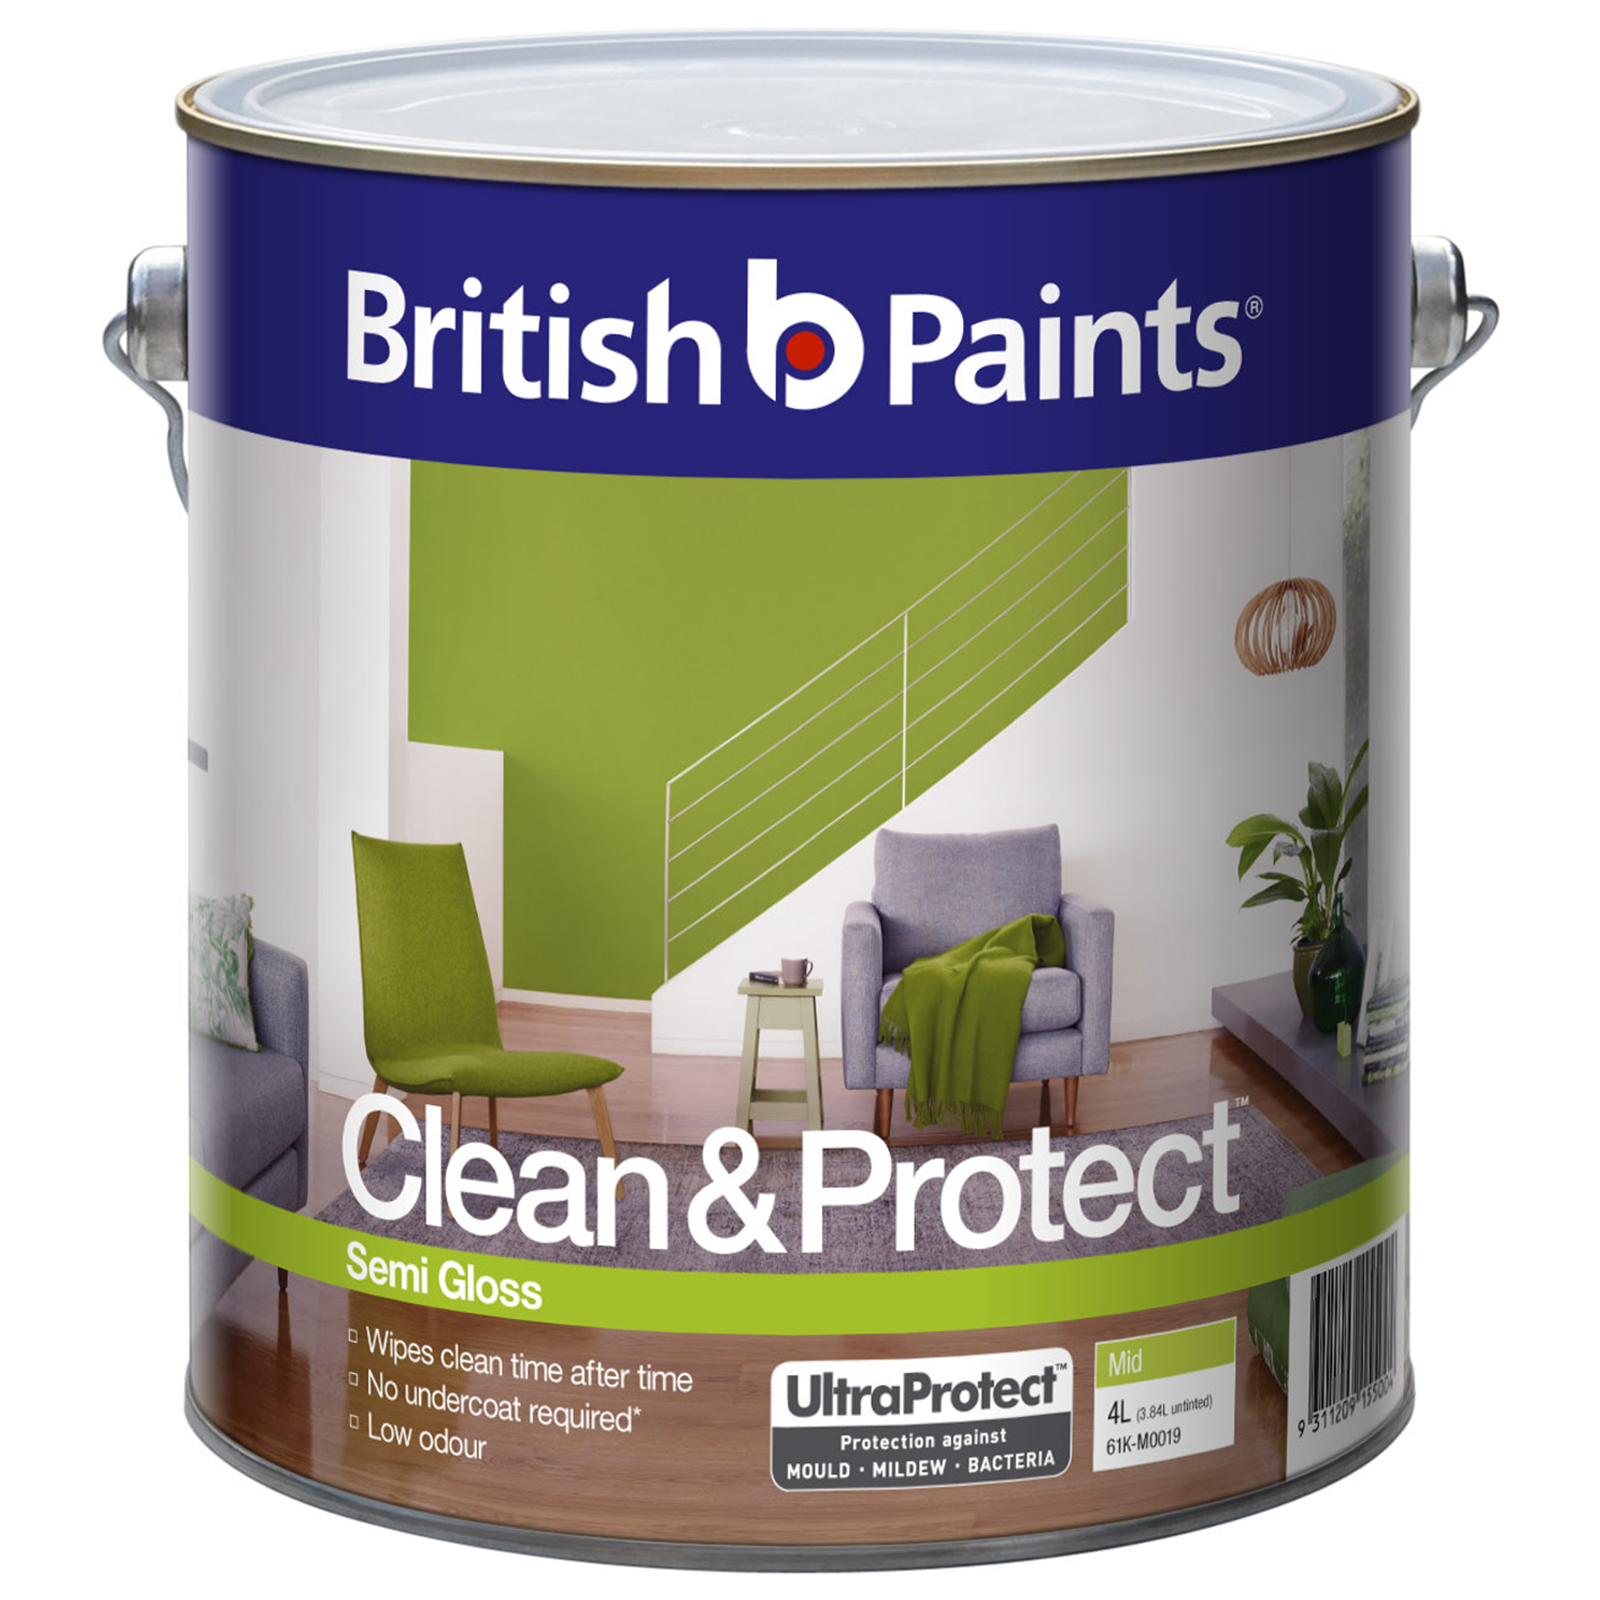 British Paints Clean & Protect 4L Semi Gloss Mid Interior Paint